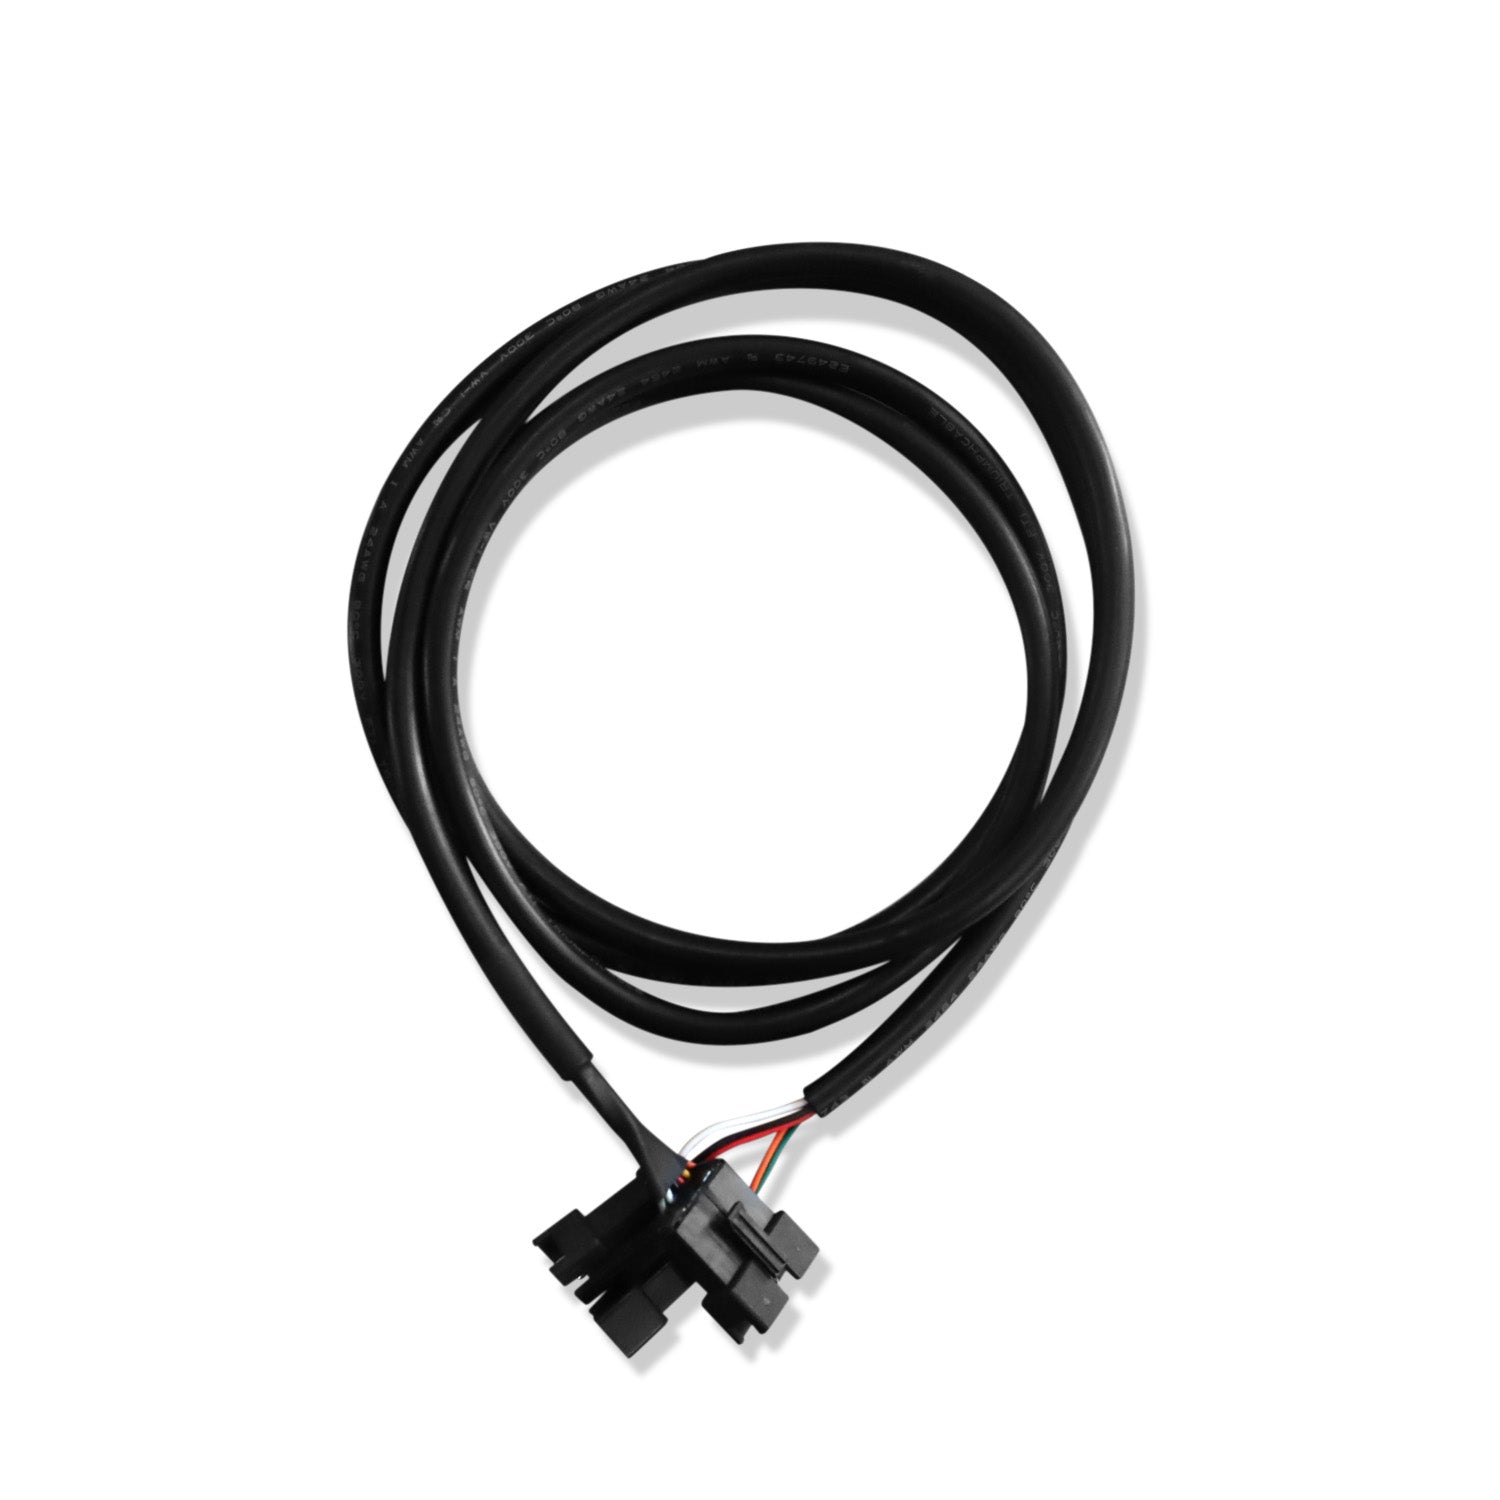 Hiboy S2 / S2 Pro Display Controller Cable